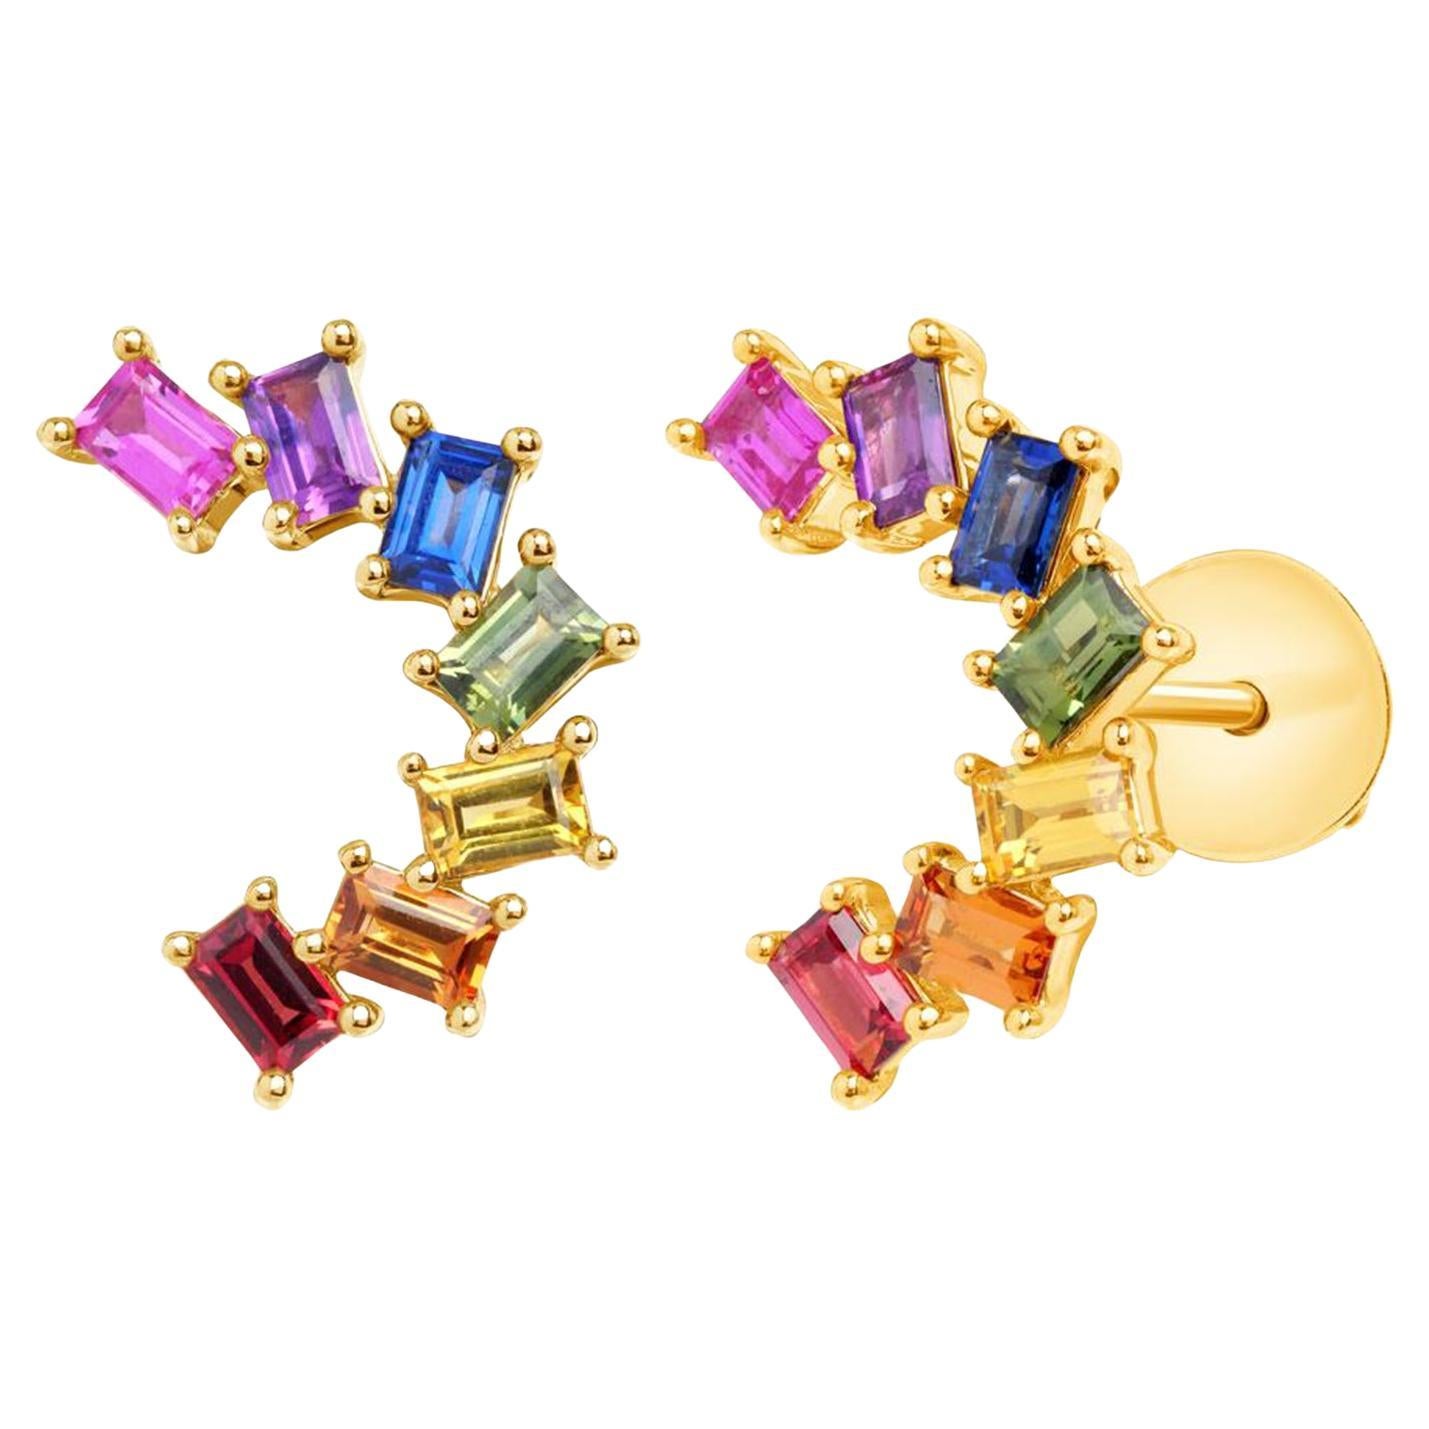 14K Yellow Gold 1.40 CT Multicolor Sapphires Stud Earrings